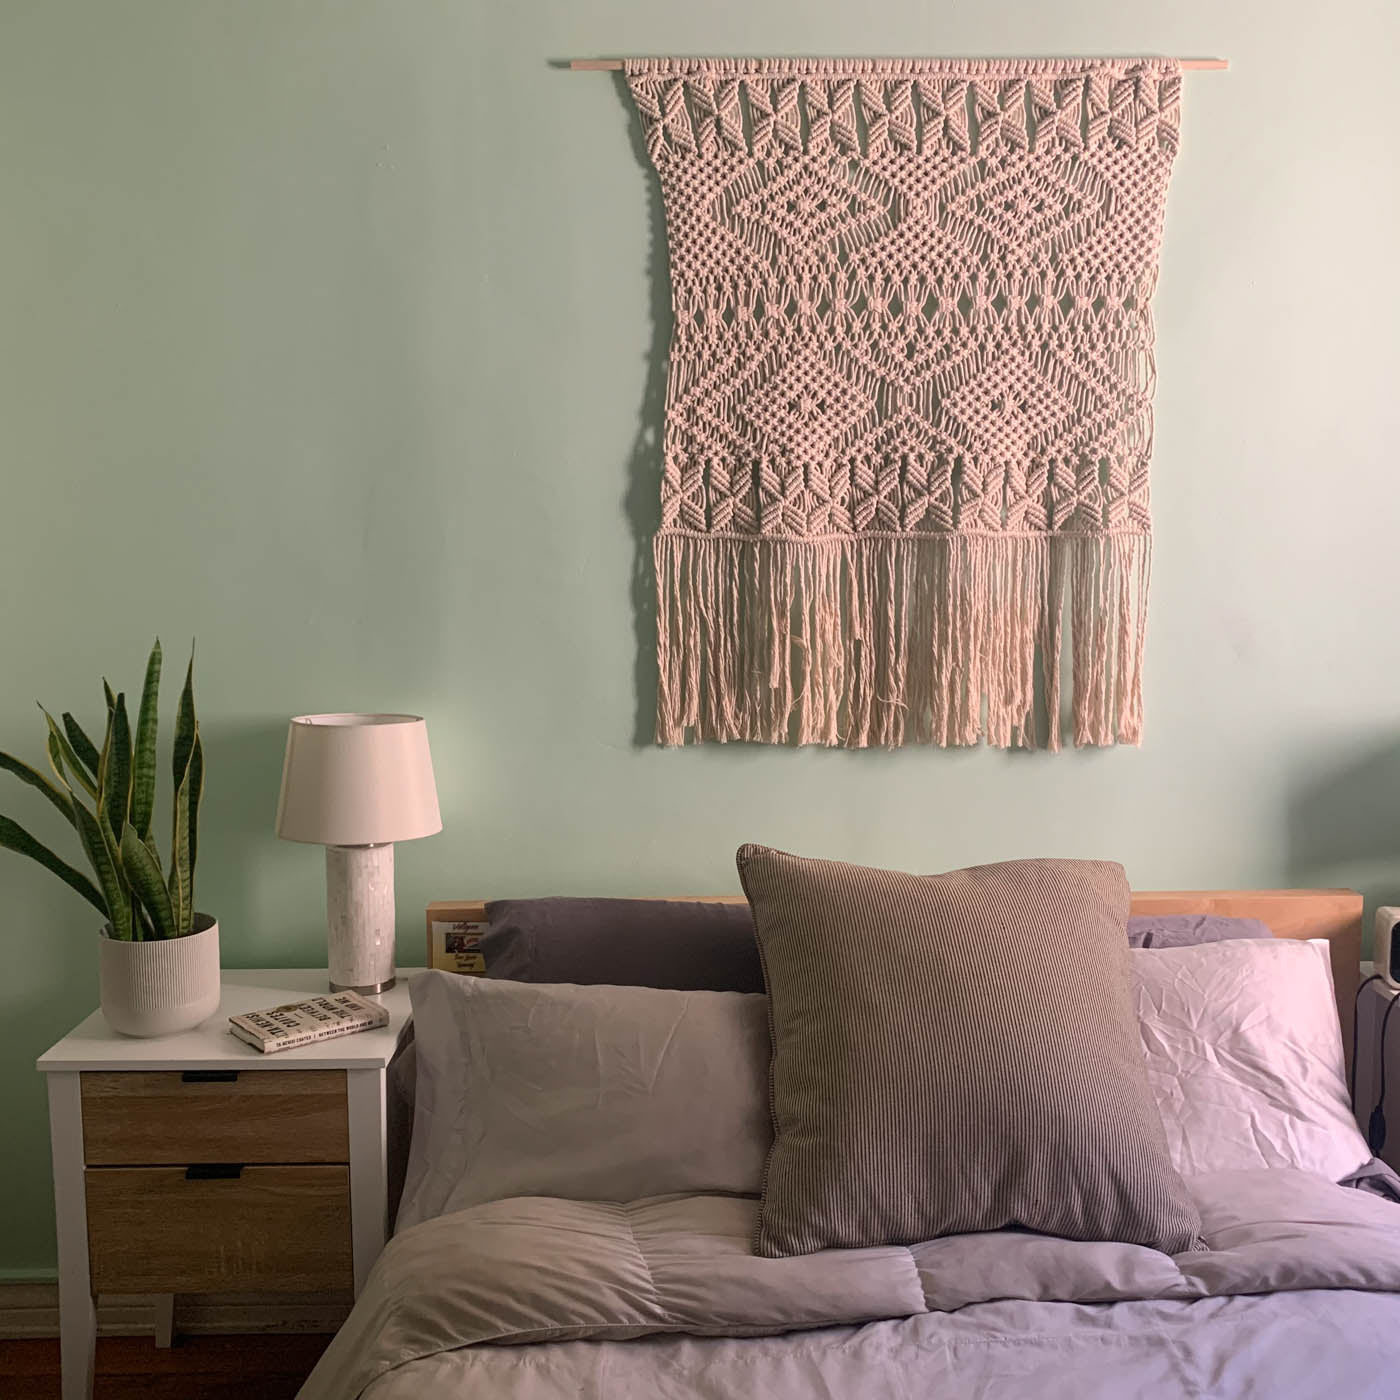 Macrame and bed